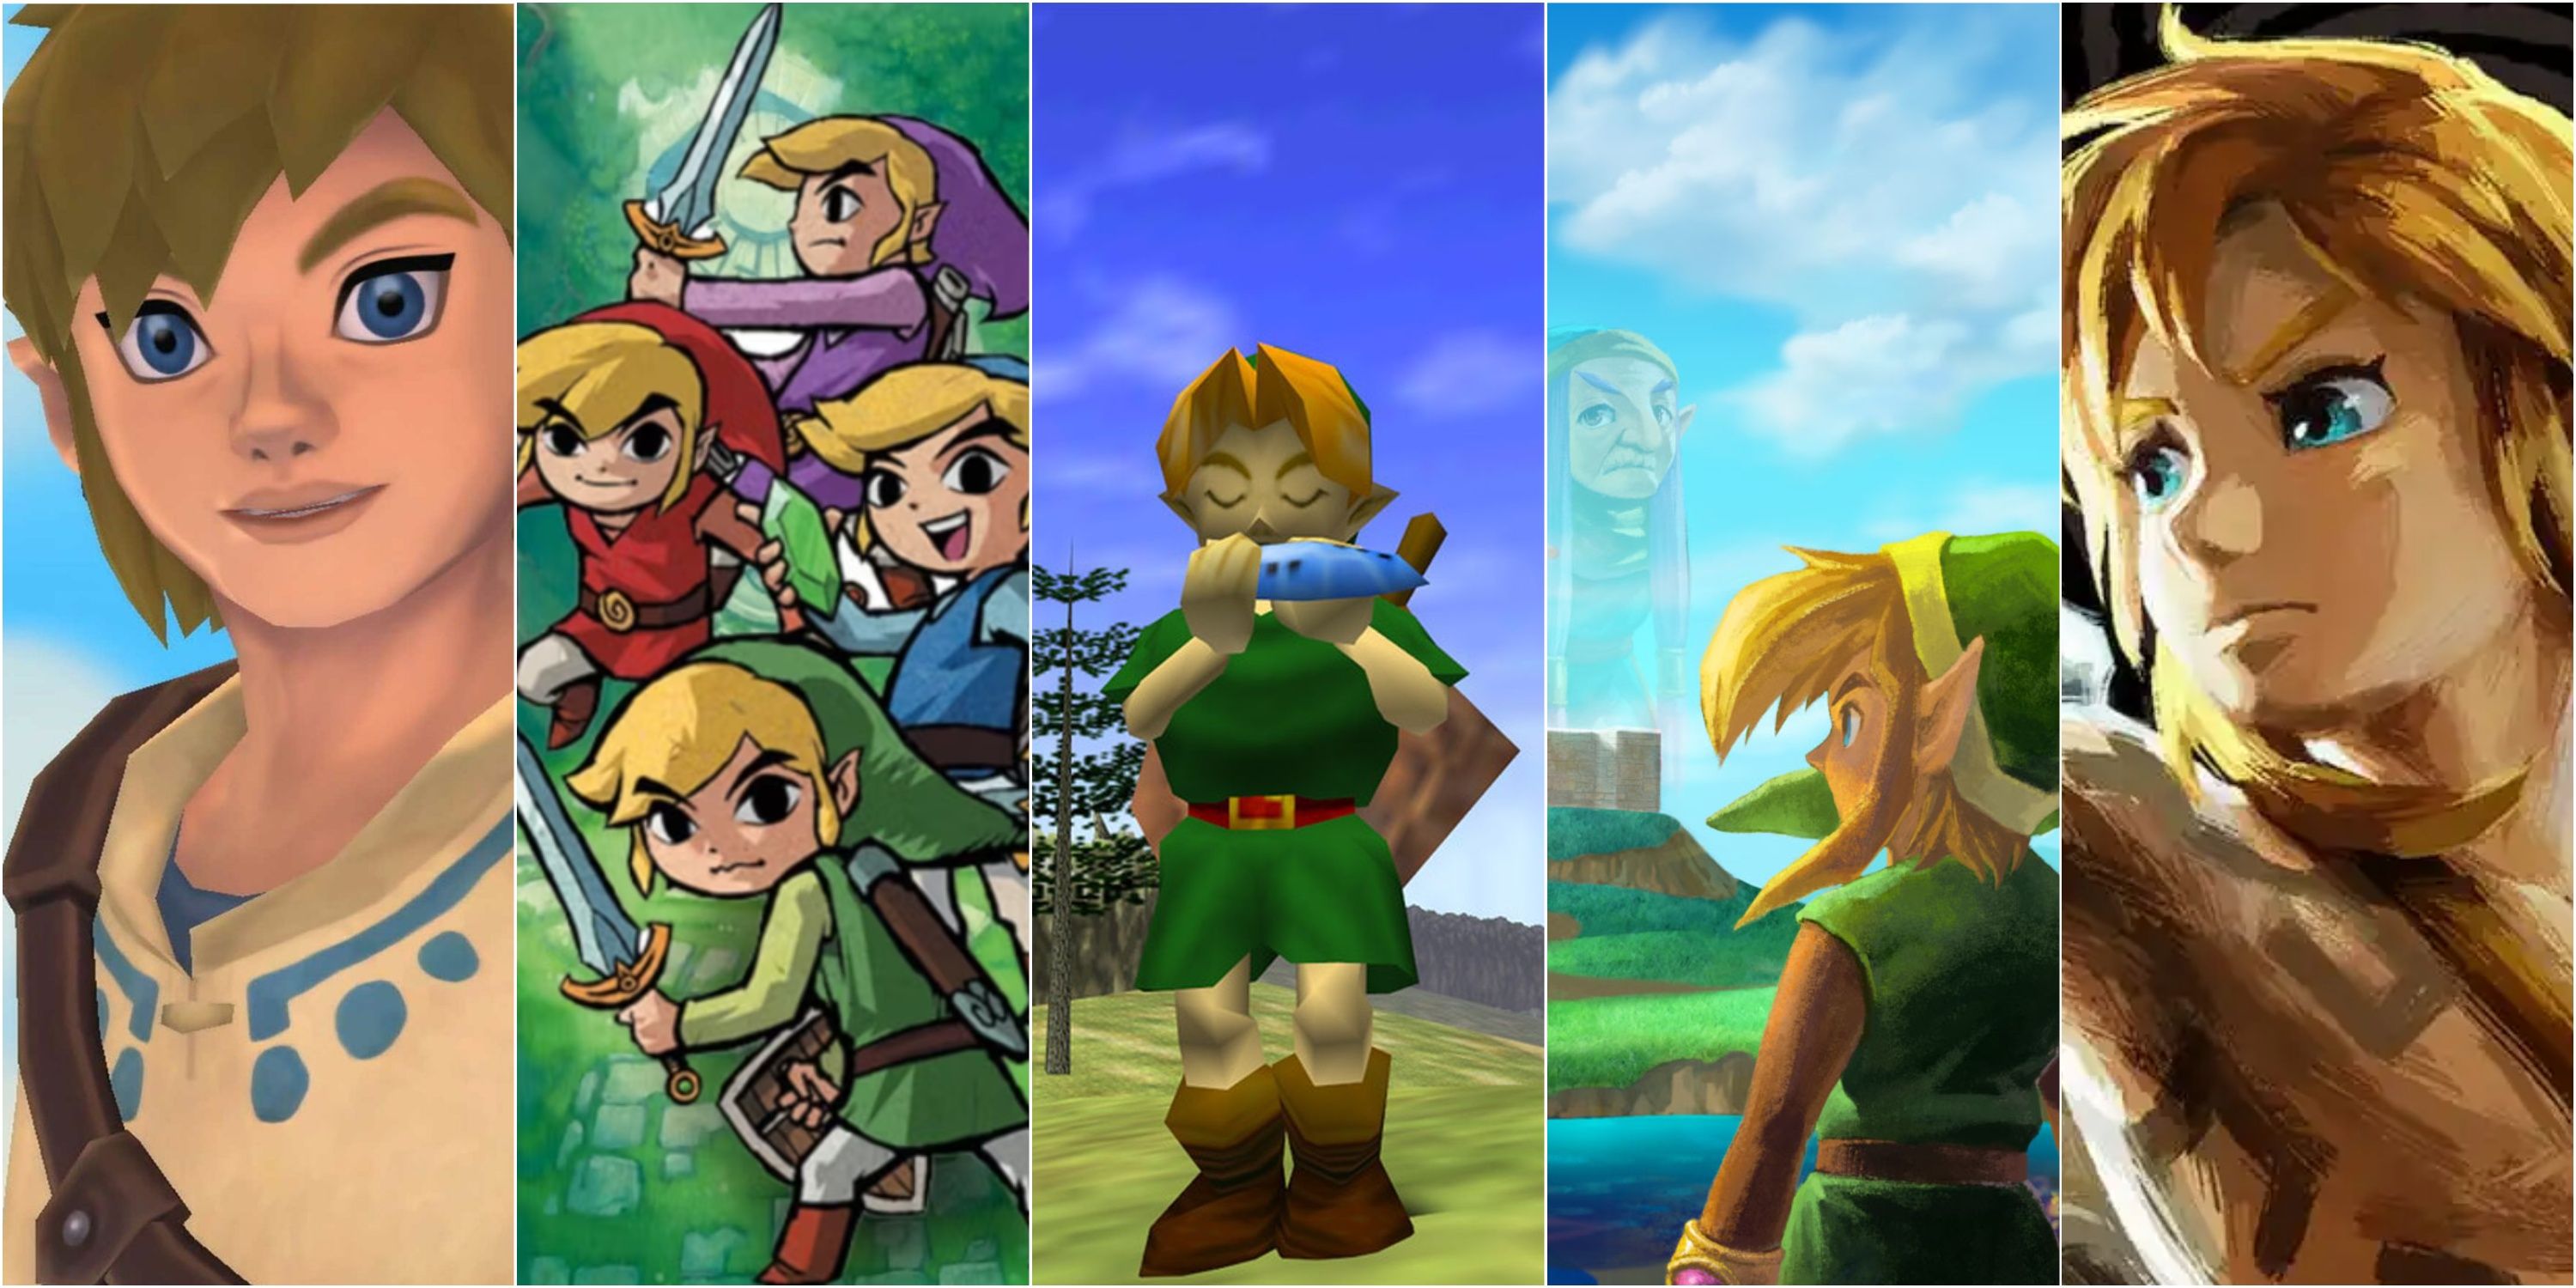 Link Through the Ages -1